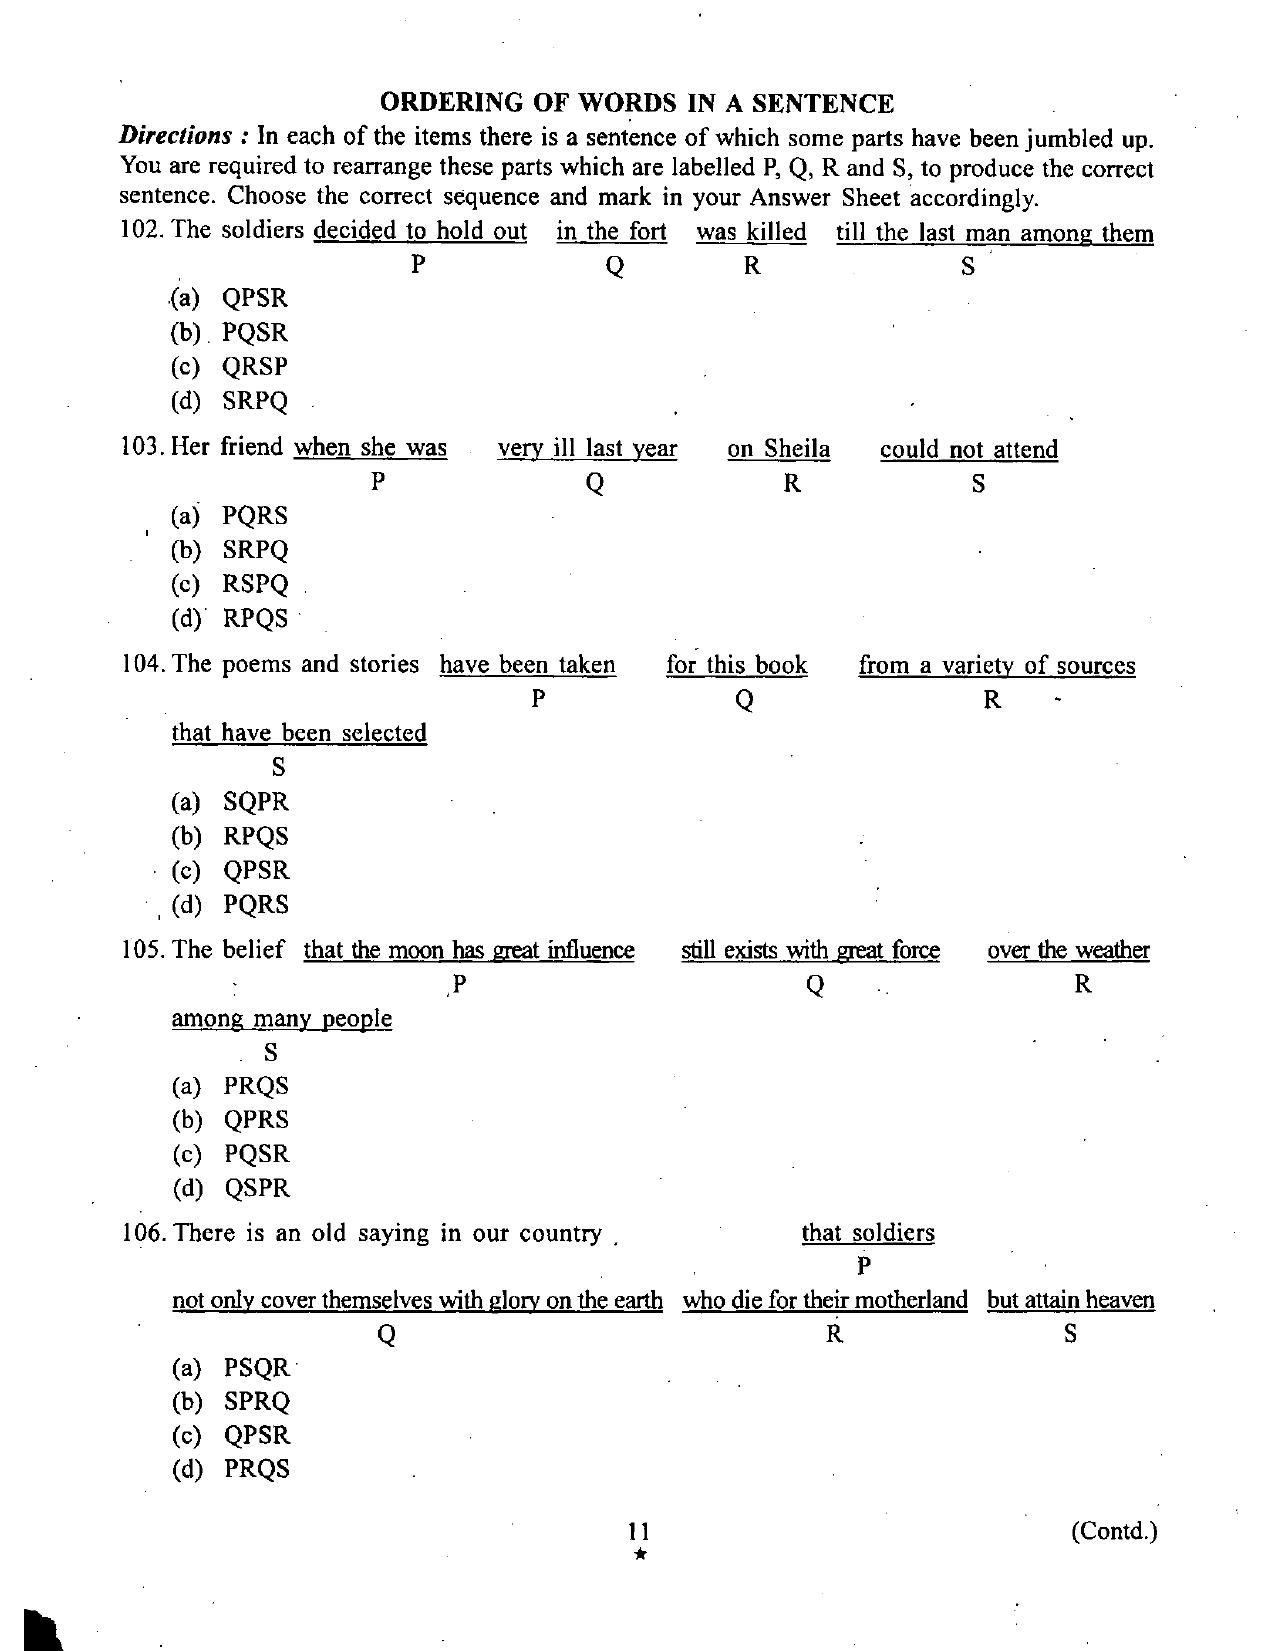 Jharkhand High Court Assistant Previous Year Question Paper - Page 11